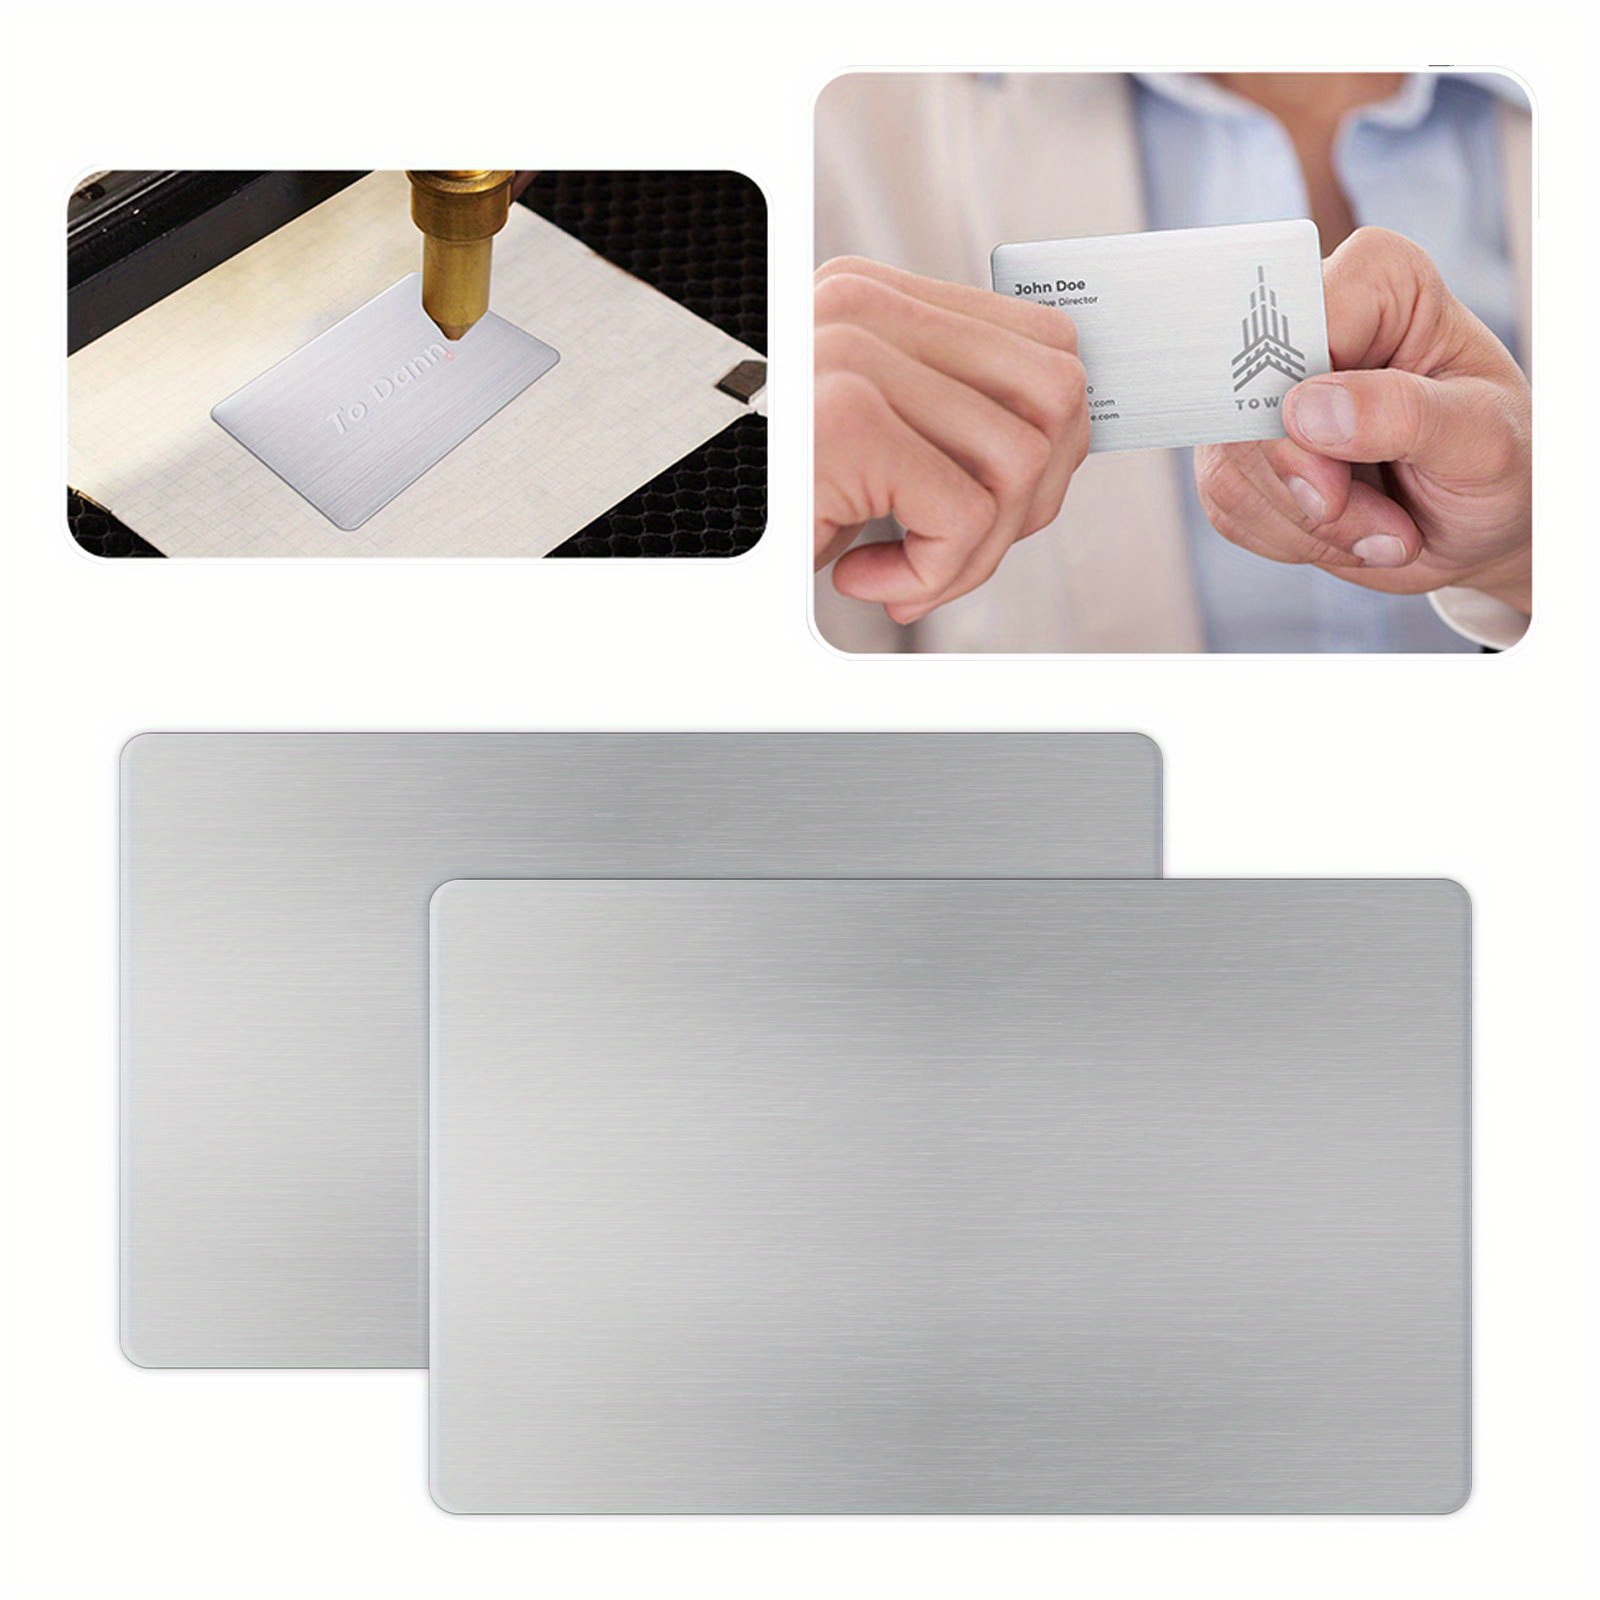 Sublimation Business Cards - 0.5mm Thick - Double Sided